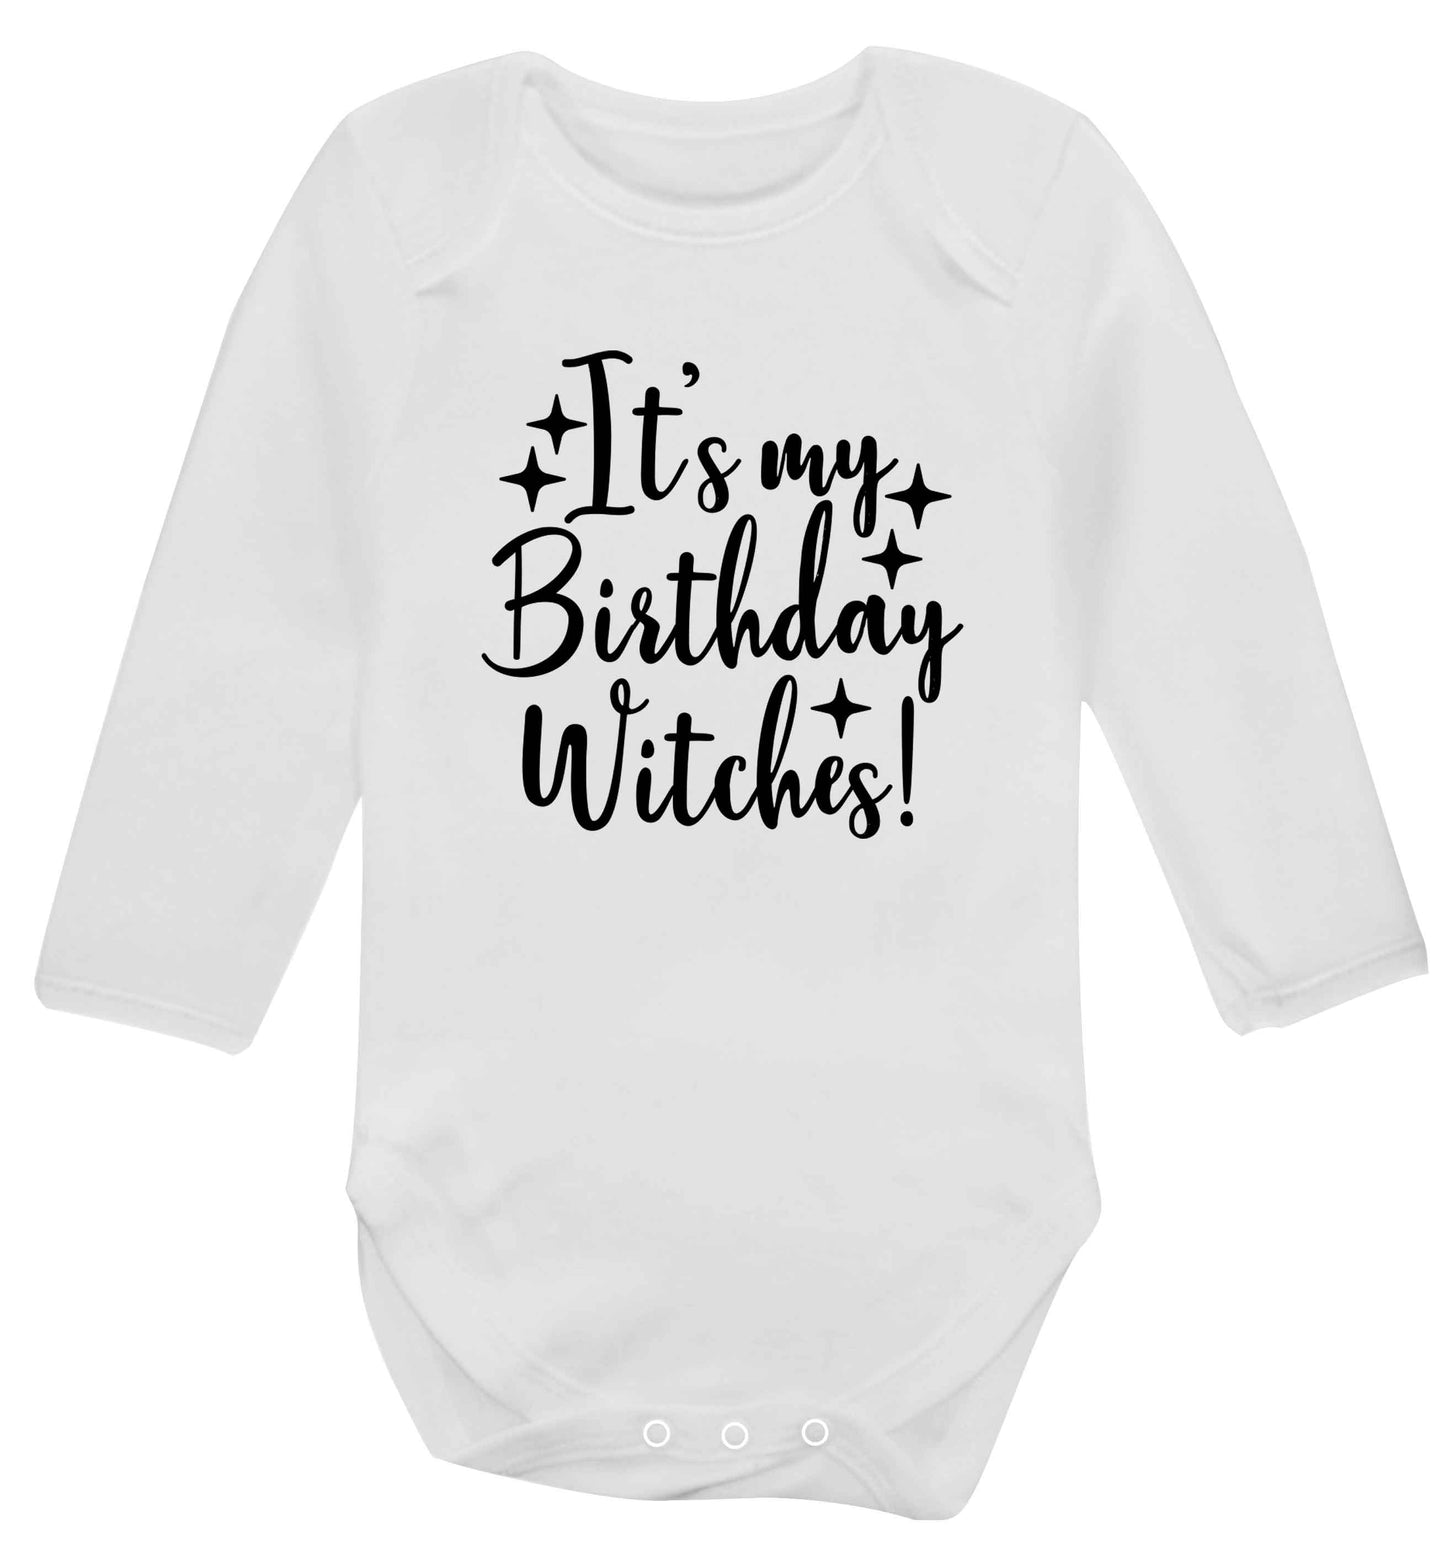 It's my birthday witches!baby vest long sleeved white 6-12 months